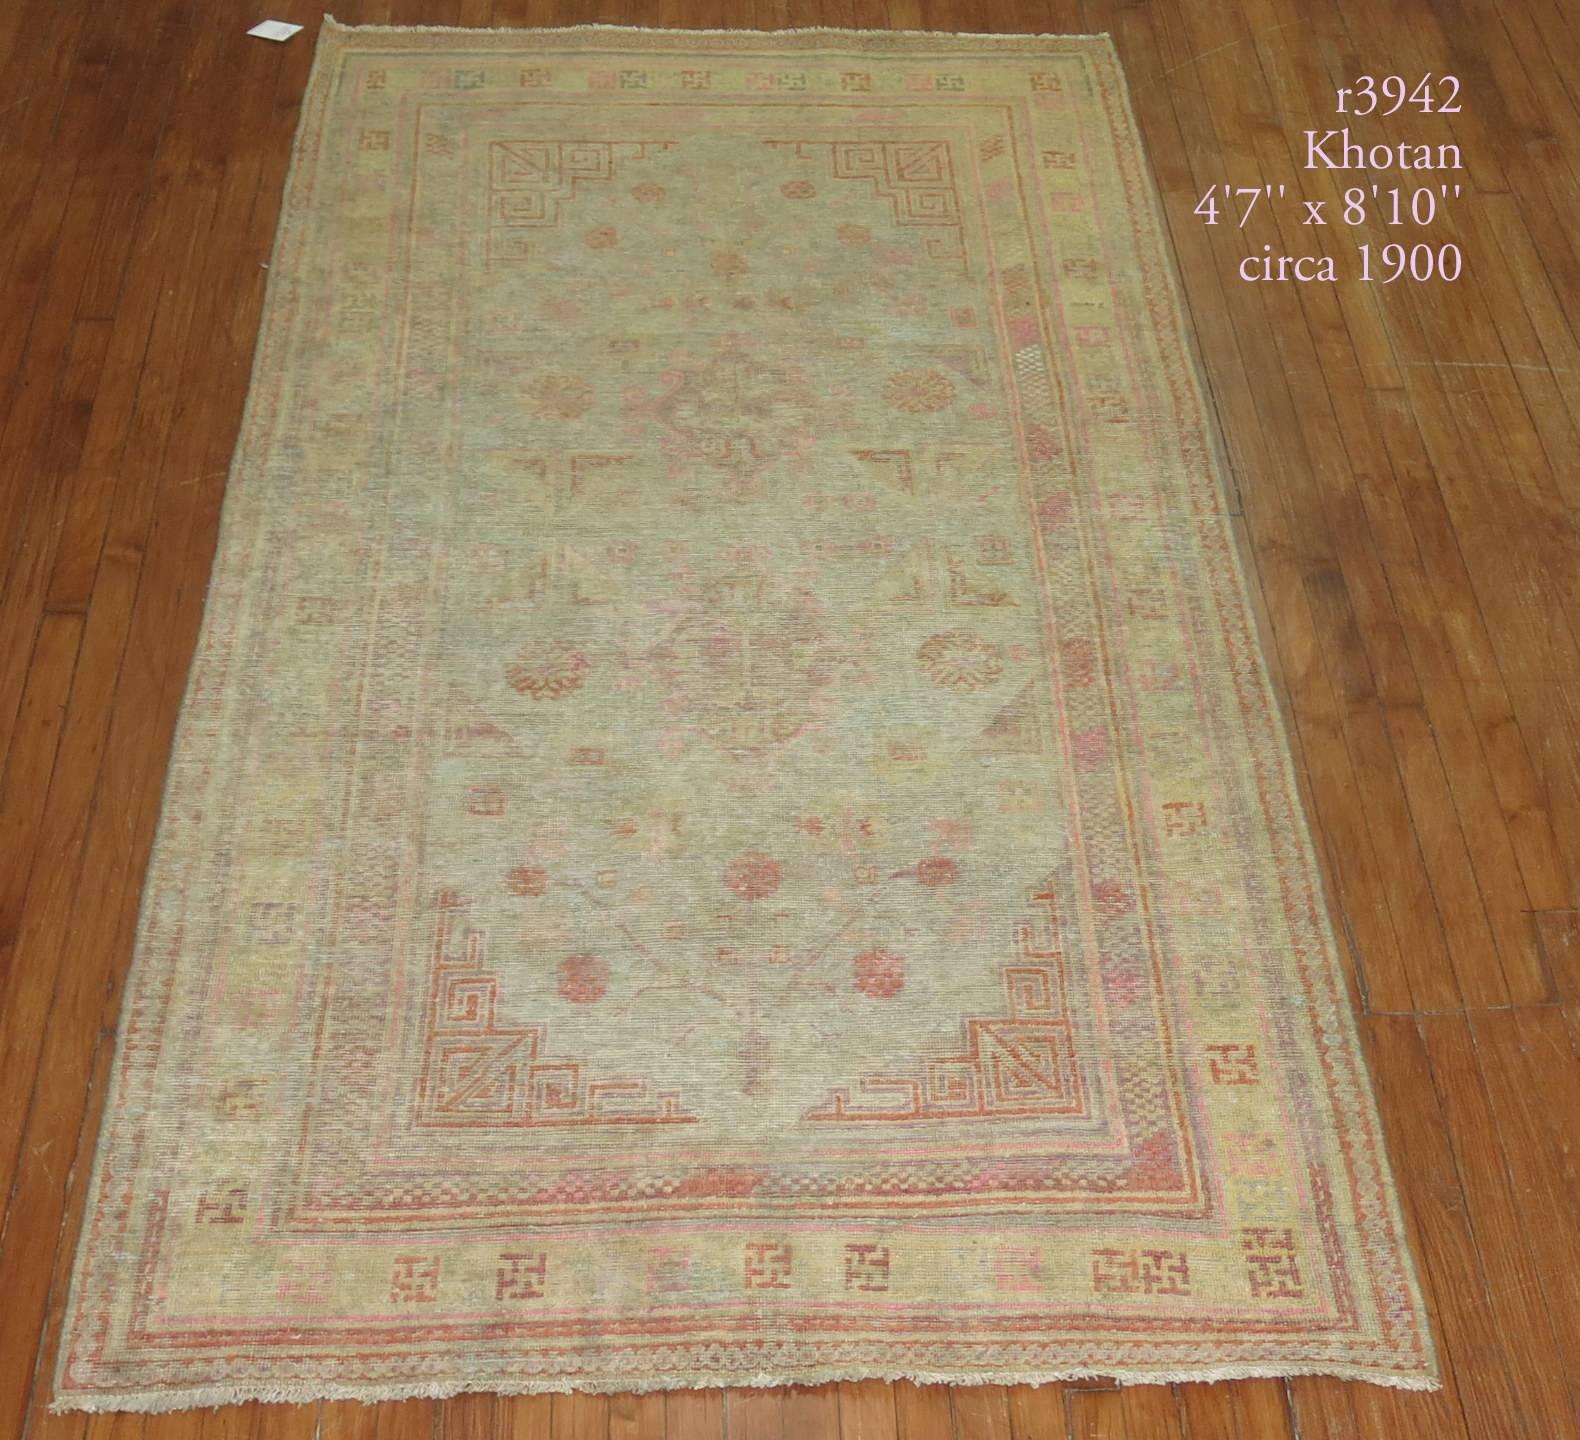 Late 19th century distressed antique Khotan rug featuring light accents in pink on a gray field.

Measures: 4'7